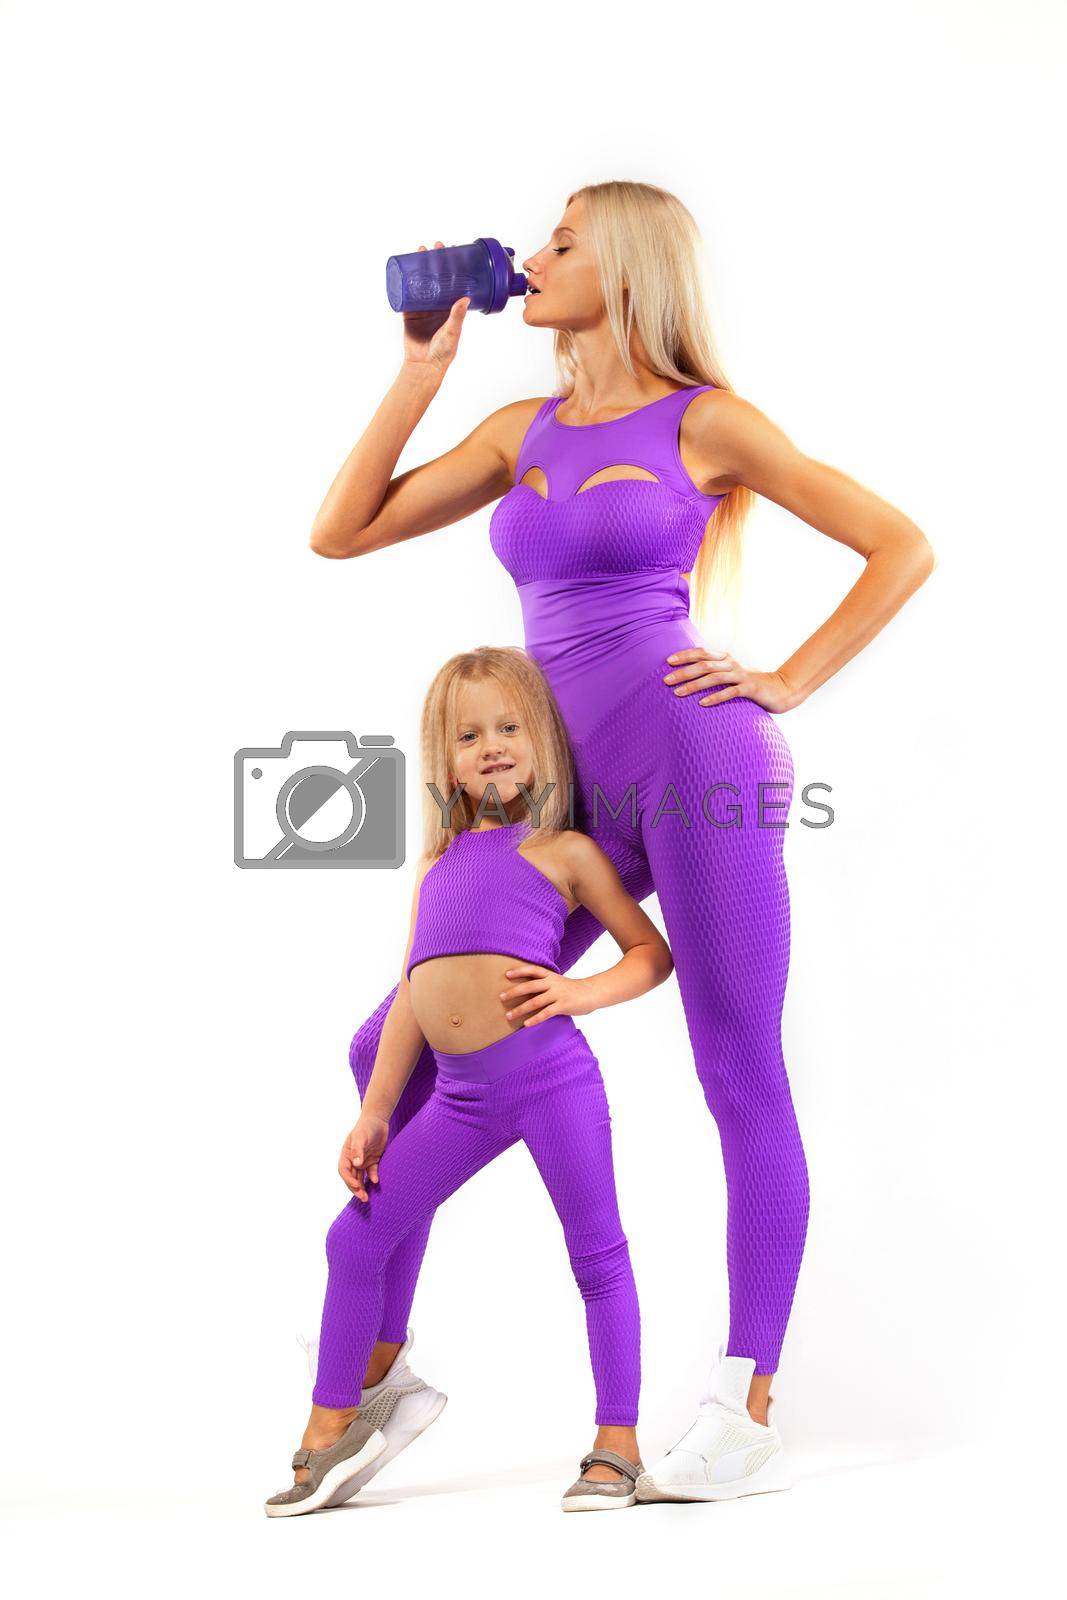 Royalty free image of Mom and daughter rest after fitness with a shaker in hands. Isolated on white background. by MikeOrlov